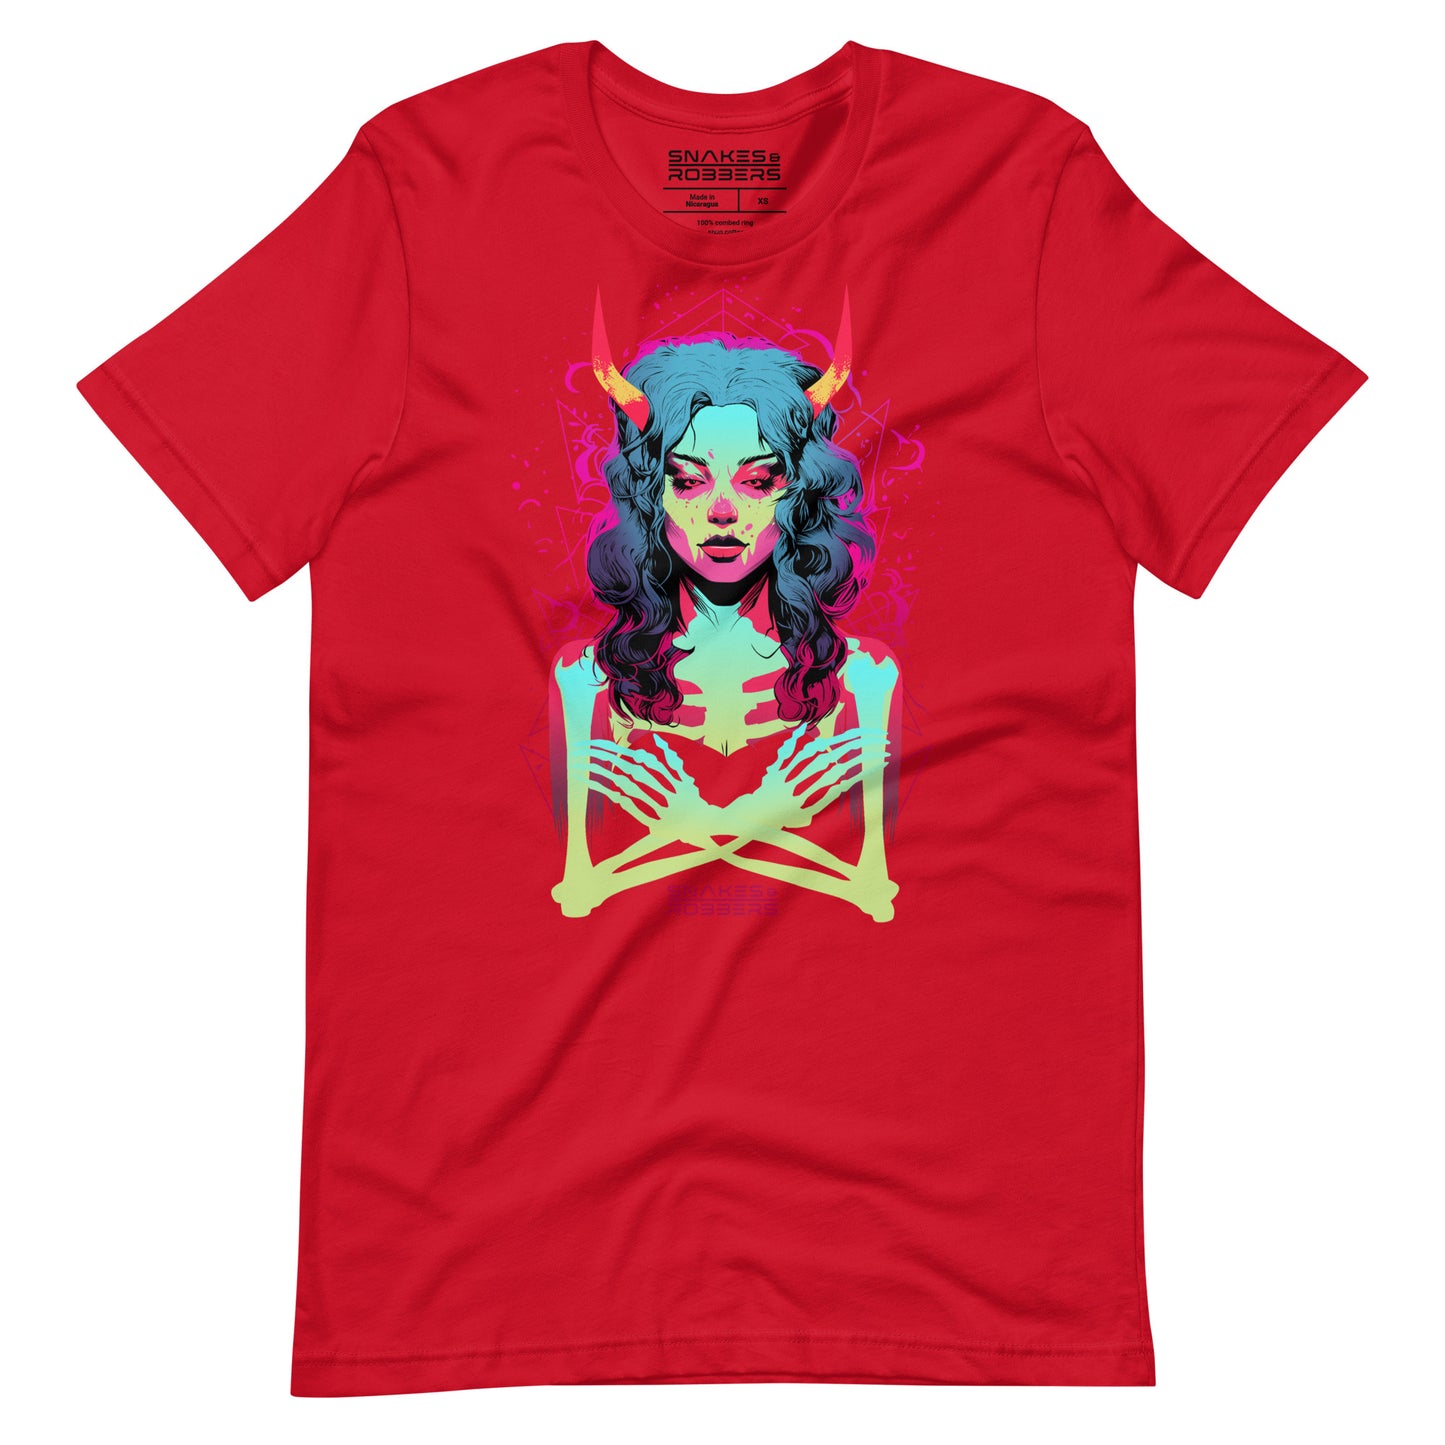 The Warning Unisex Retail Fit T-Shirt